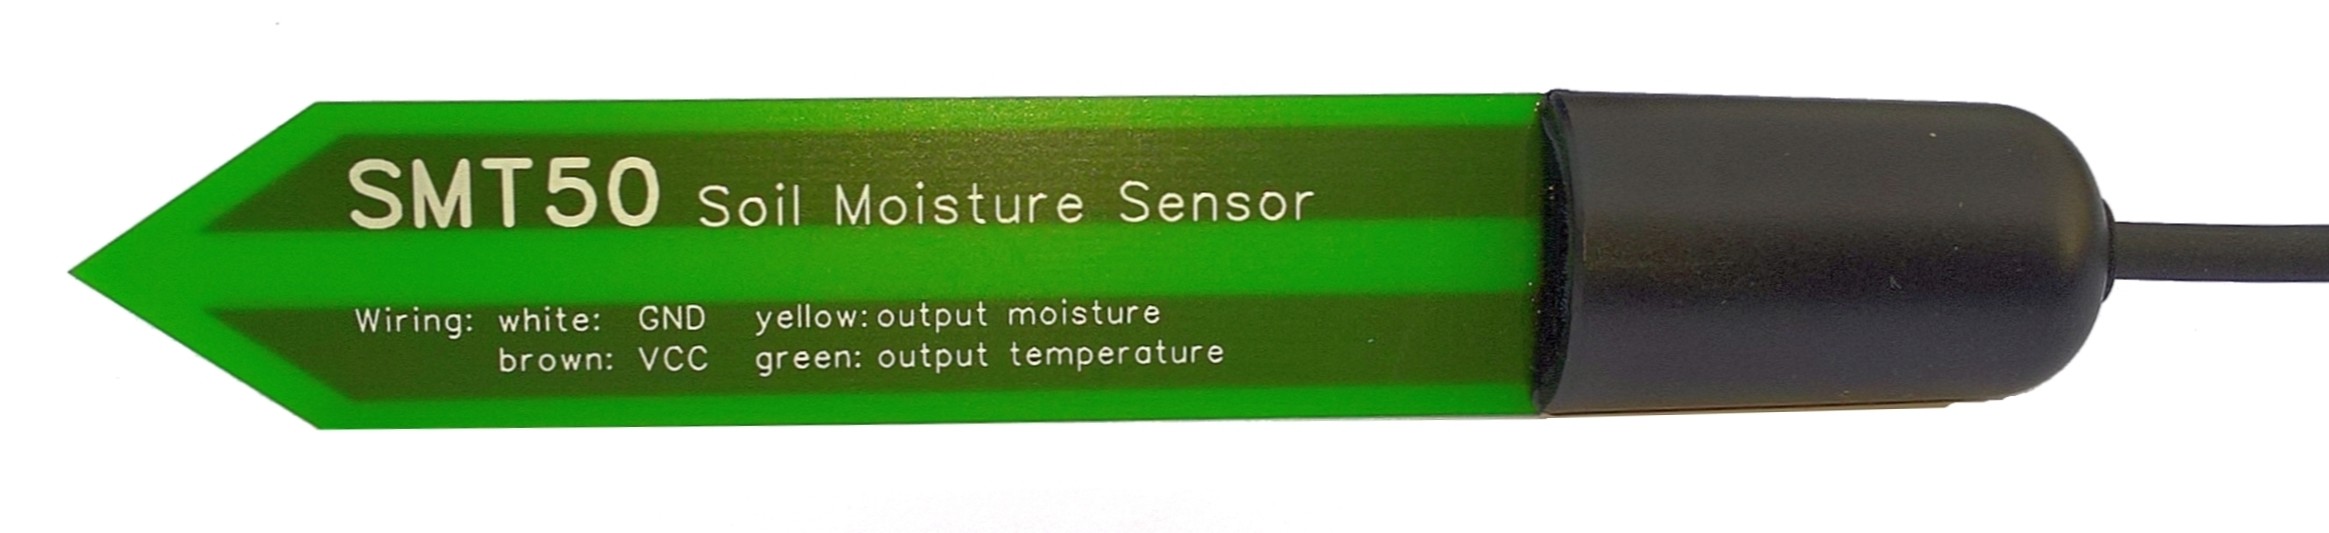 SMT 50 high-frequency capacitive sensor. Moisture Sensors for Watering Systems